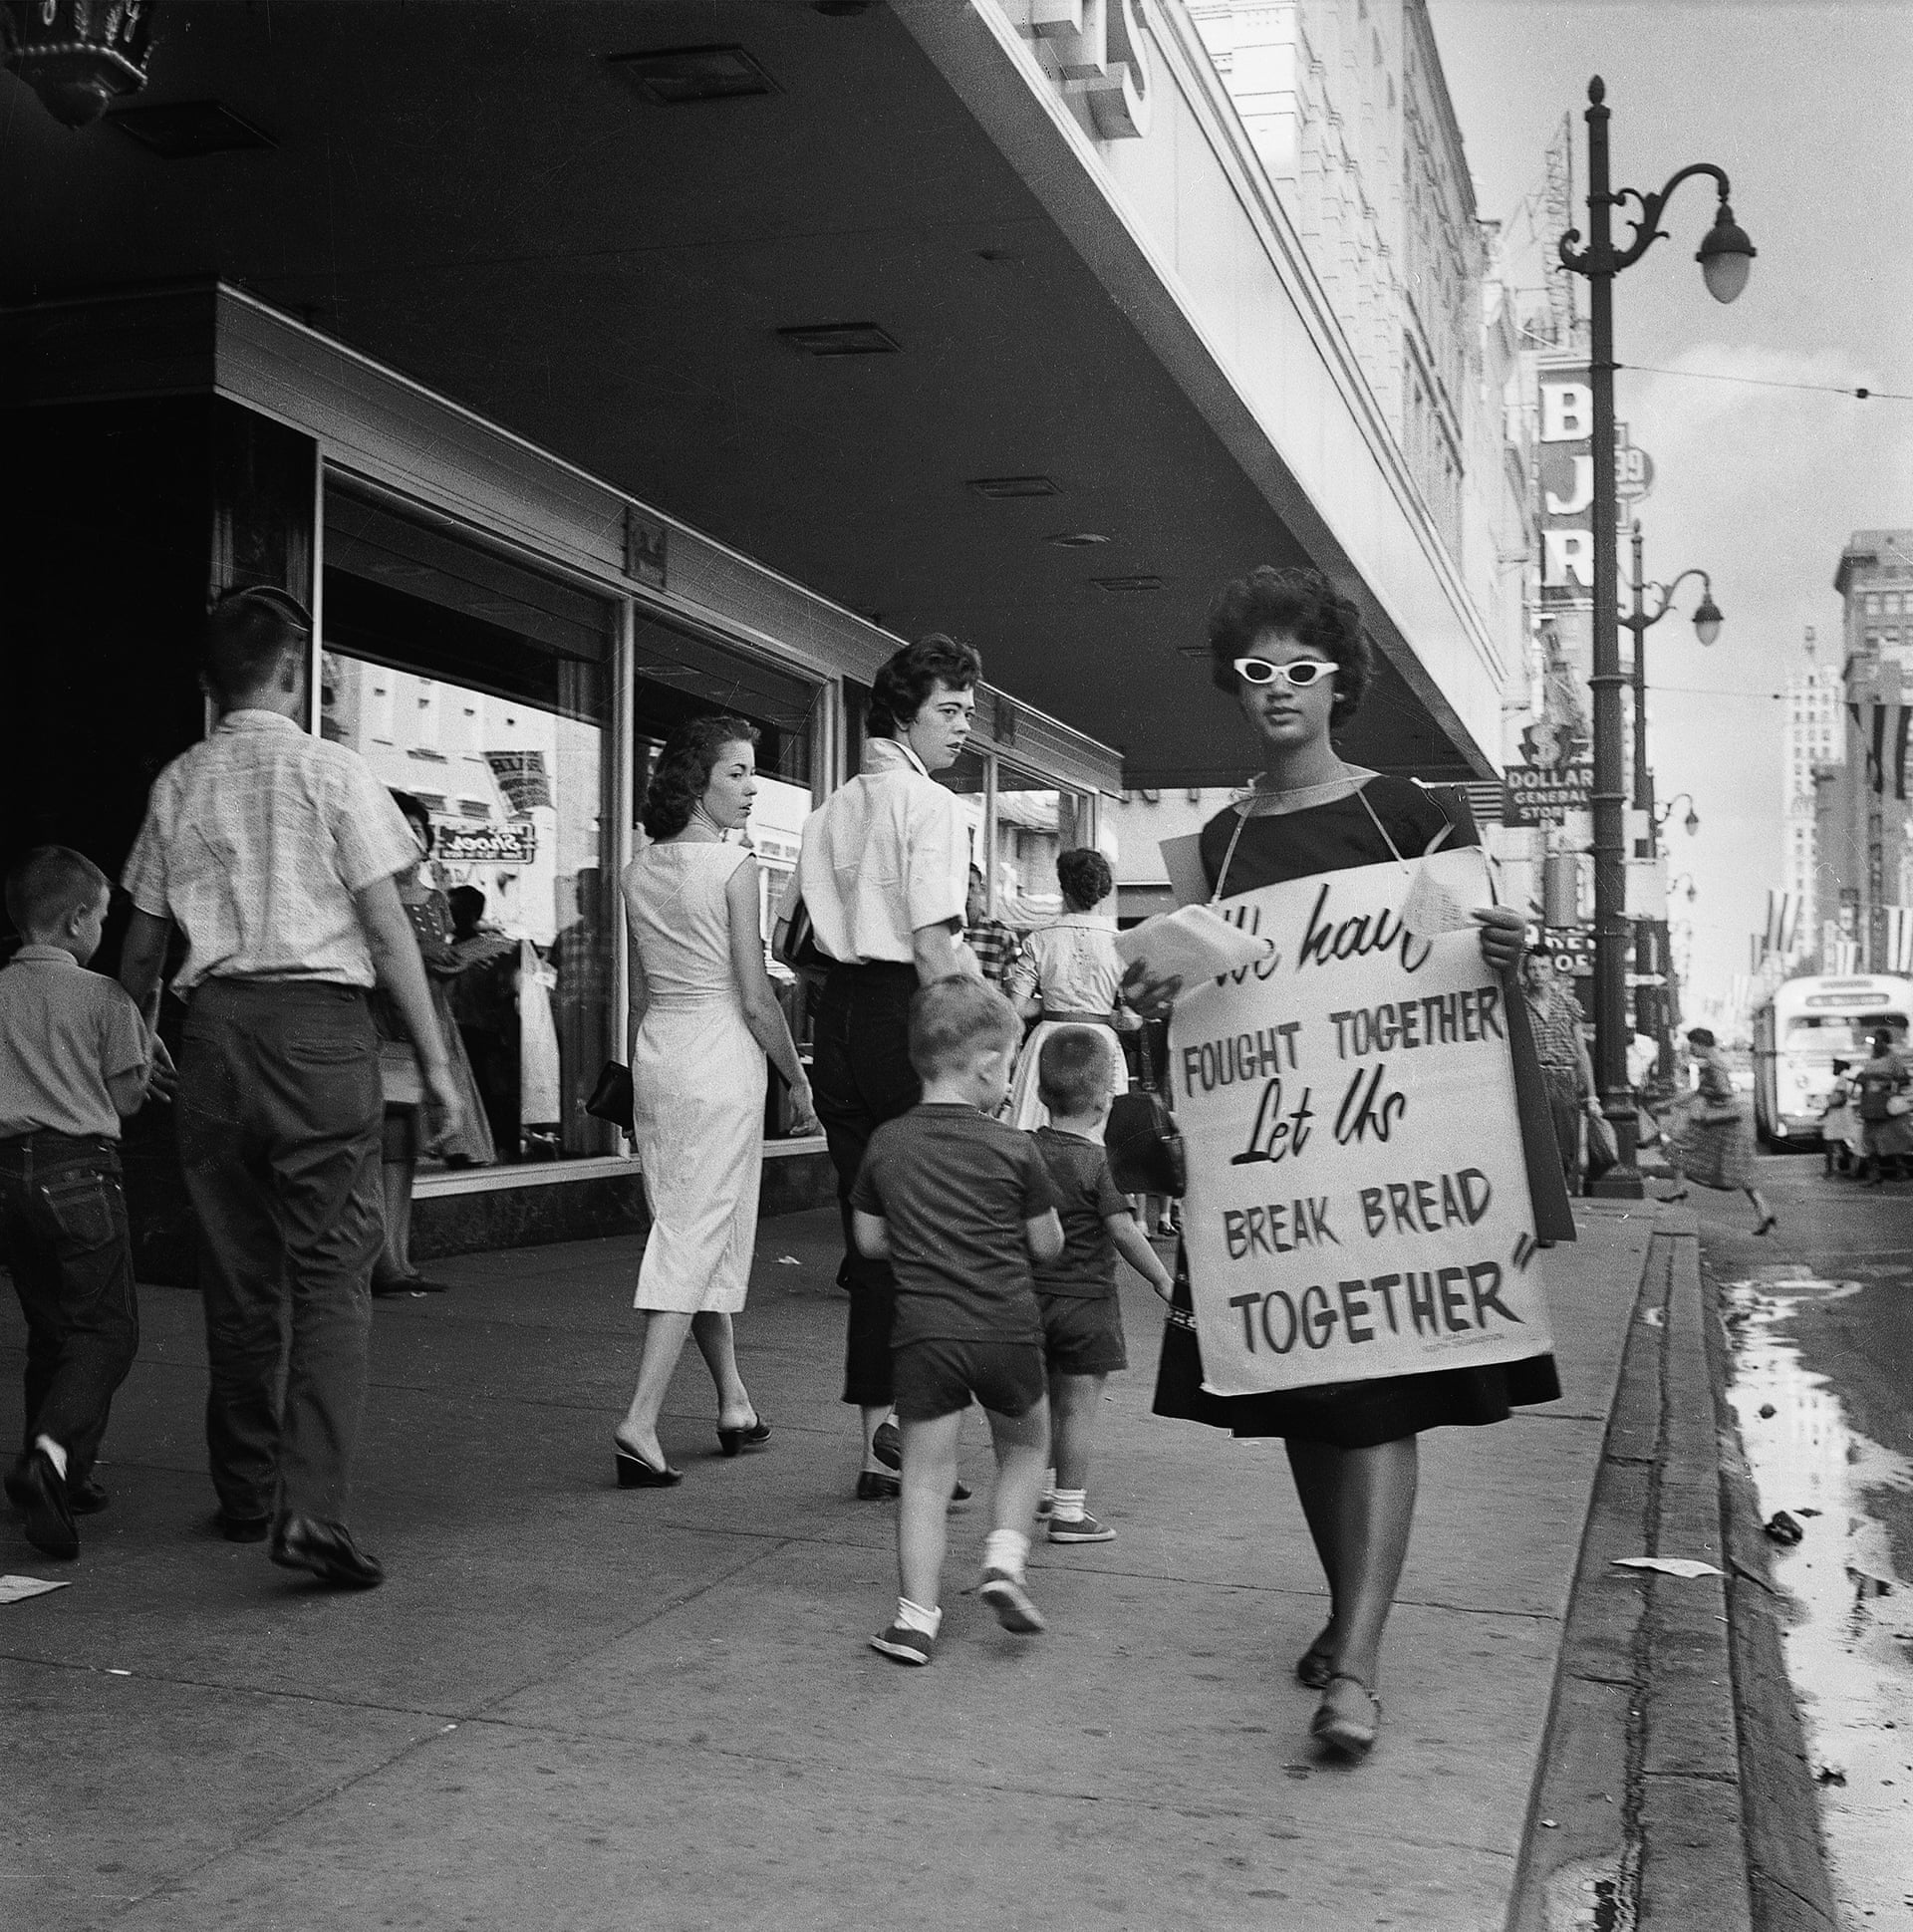 Junienne Briscoe, 16 years old, joined the picket lines along Main Street, no date